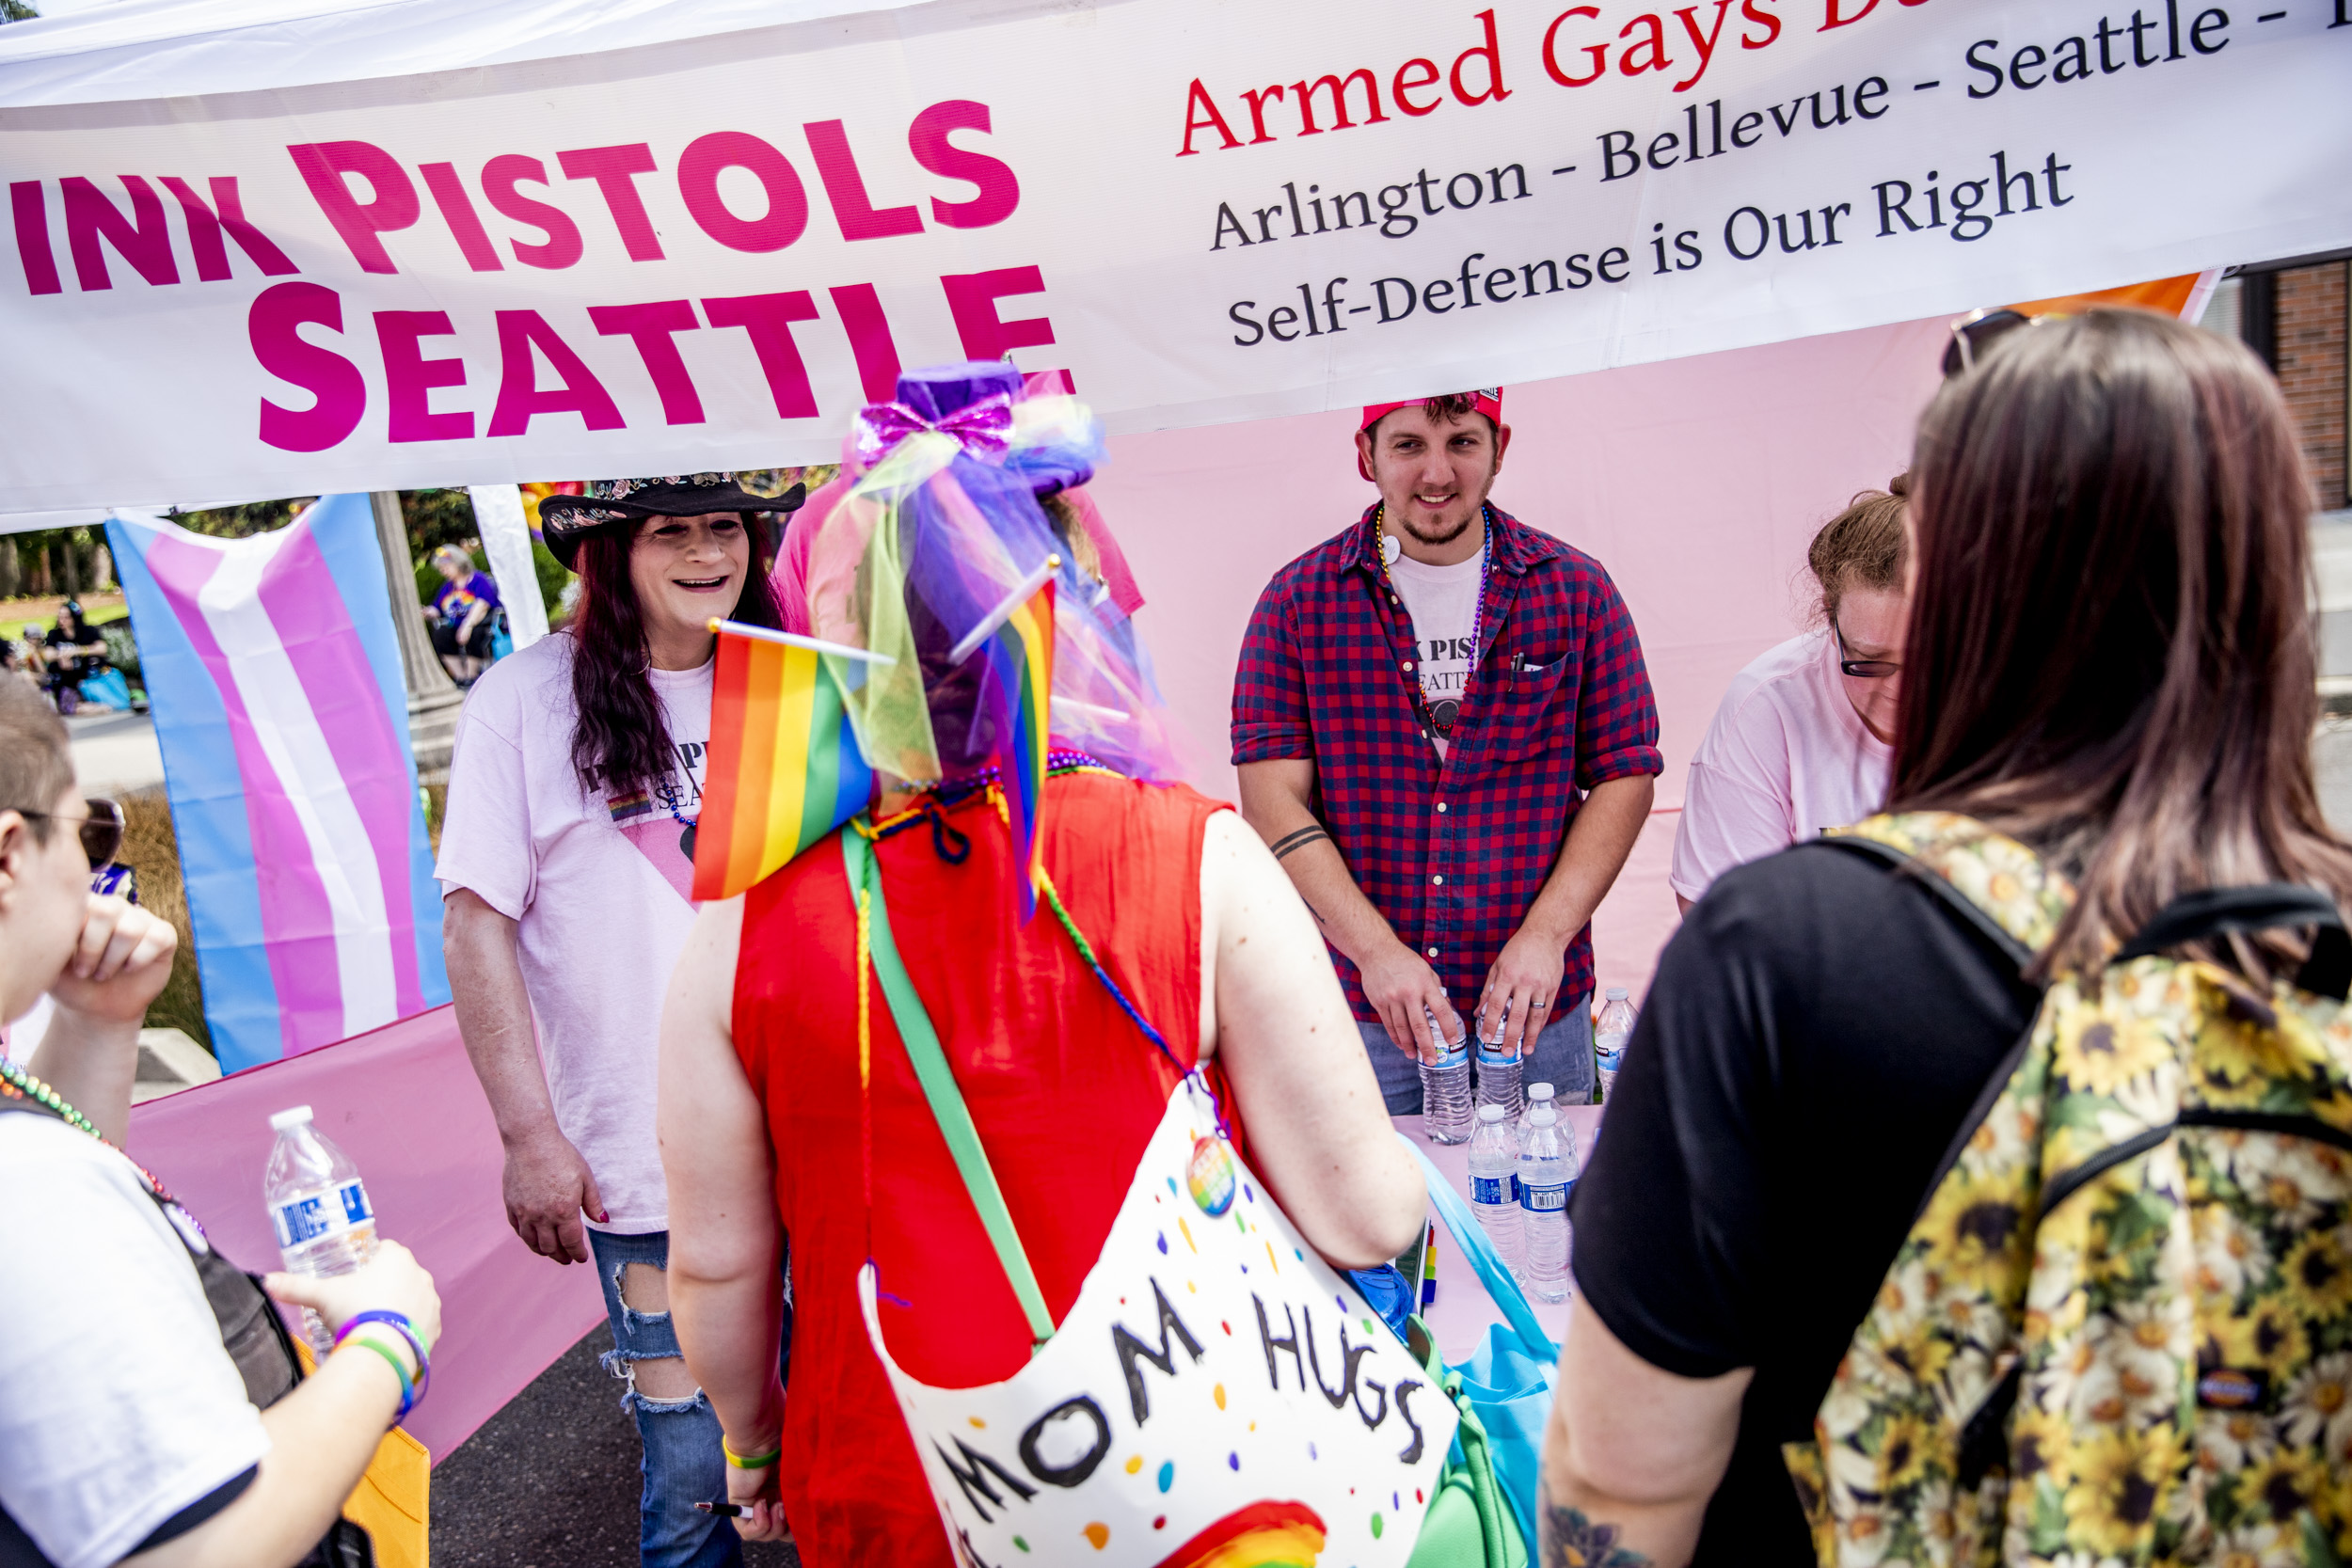 Pink Pistols members talk to attendees during Tacoma Pride on July 13, 2019. Pink Pistols Seattle administrator Sharyn Hinchcliffe says she has noticed more interest in Pink Pistols since the Pulse night club shooting in June 2016 and the election of President Trump. “I would say the increase in inquiries that we get and new people actually showing up - definitely there has been [an increase]. We do definitely see it. This is our third year doing pride in the region,” Hinchcliffe says. (Photo by Dorothy Edwards/Crosscut)